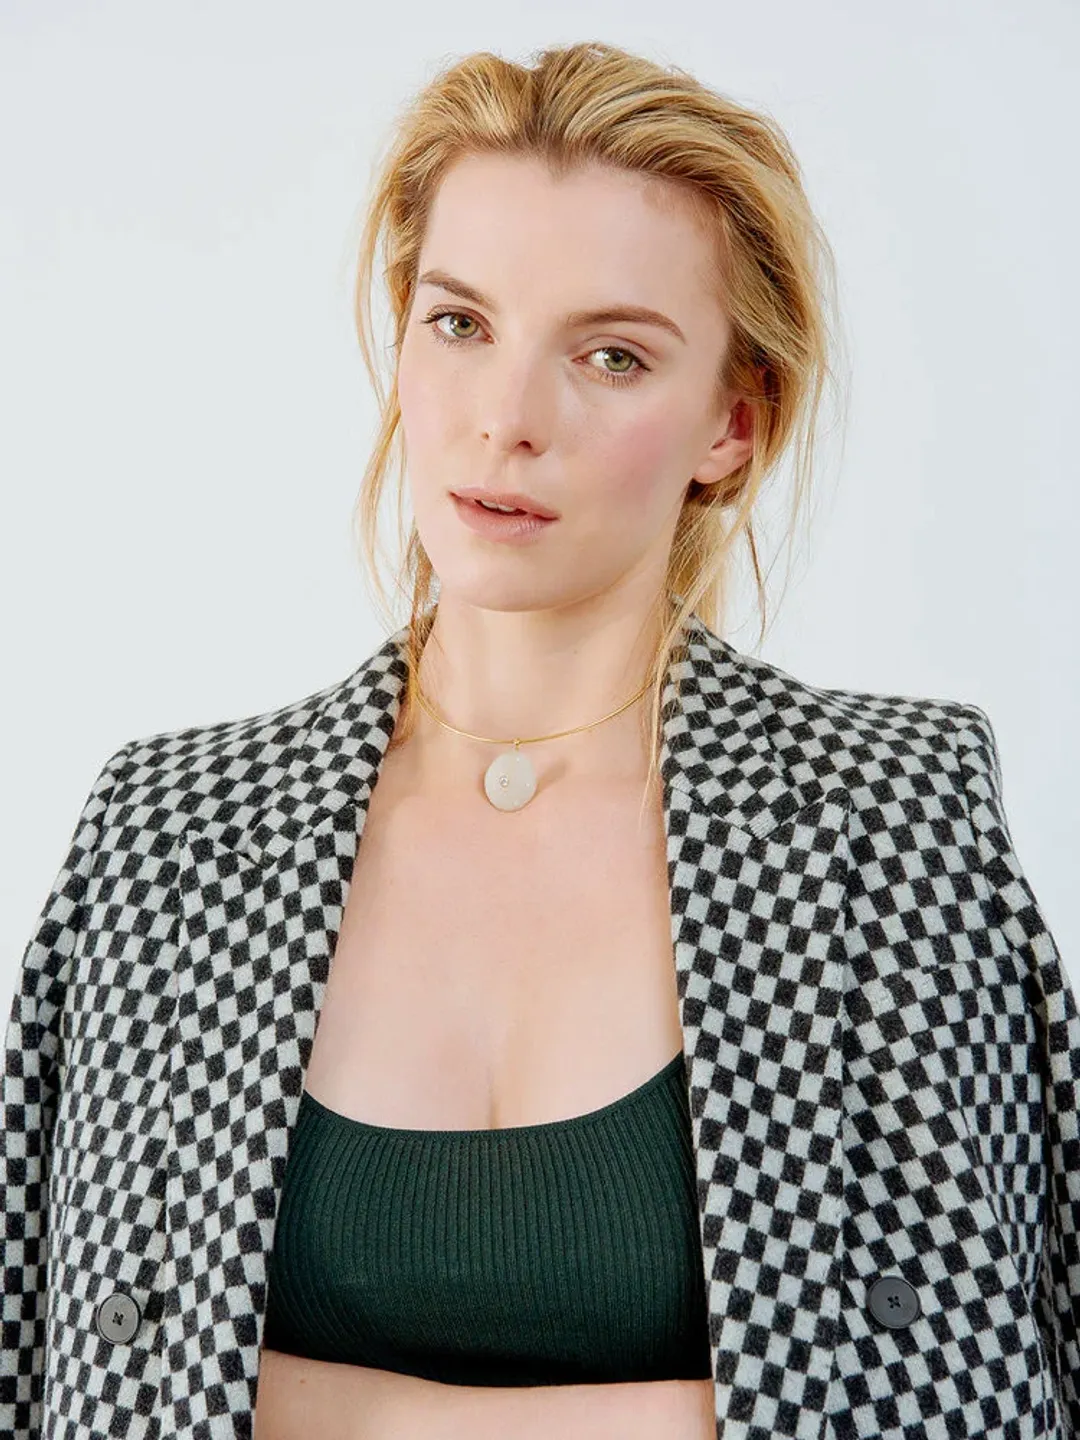 Betty Gilpin how old is she